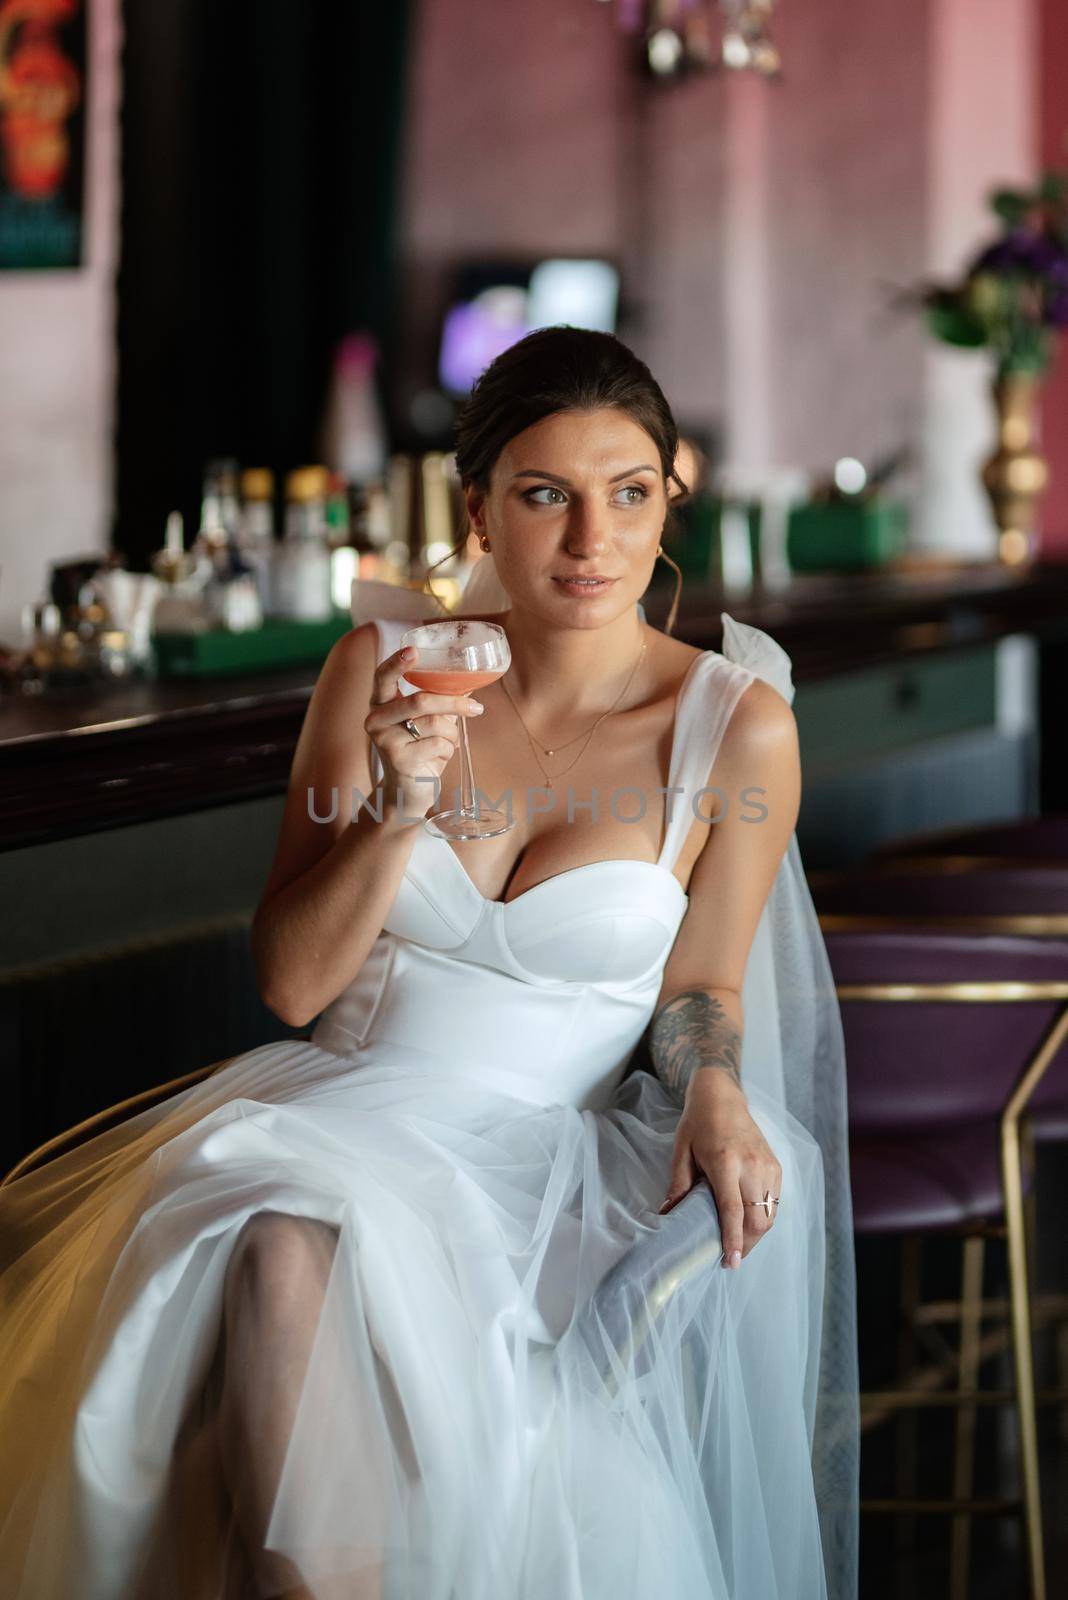 bride inside the cocktail bar at the bar in a bright atmosphere with a glass of drink